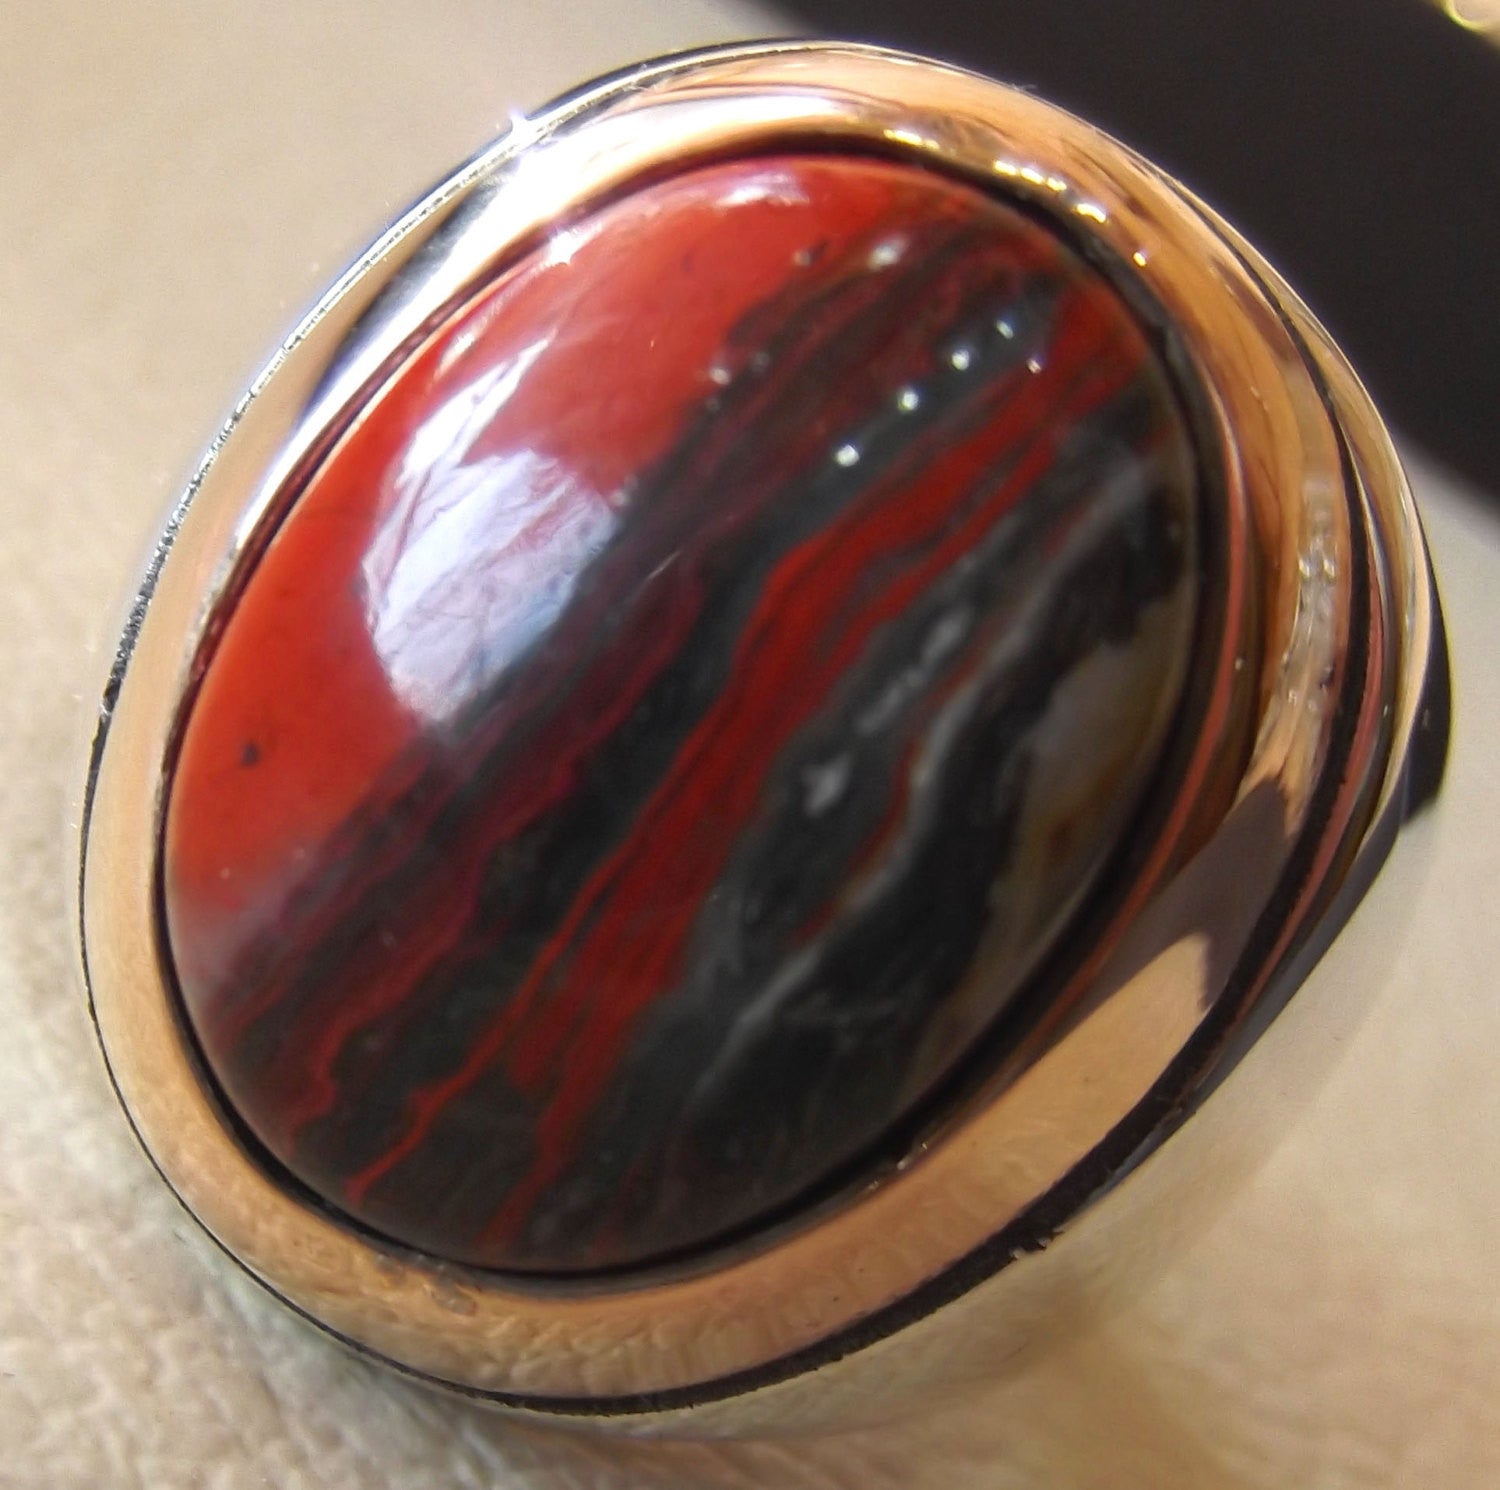 snake skin jasper stone natural gem sterling silver 925 ring red and black oval semi precious cabochon man ring jewelry with bronze frame